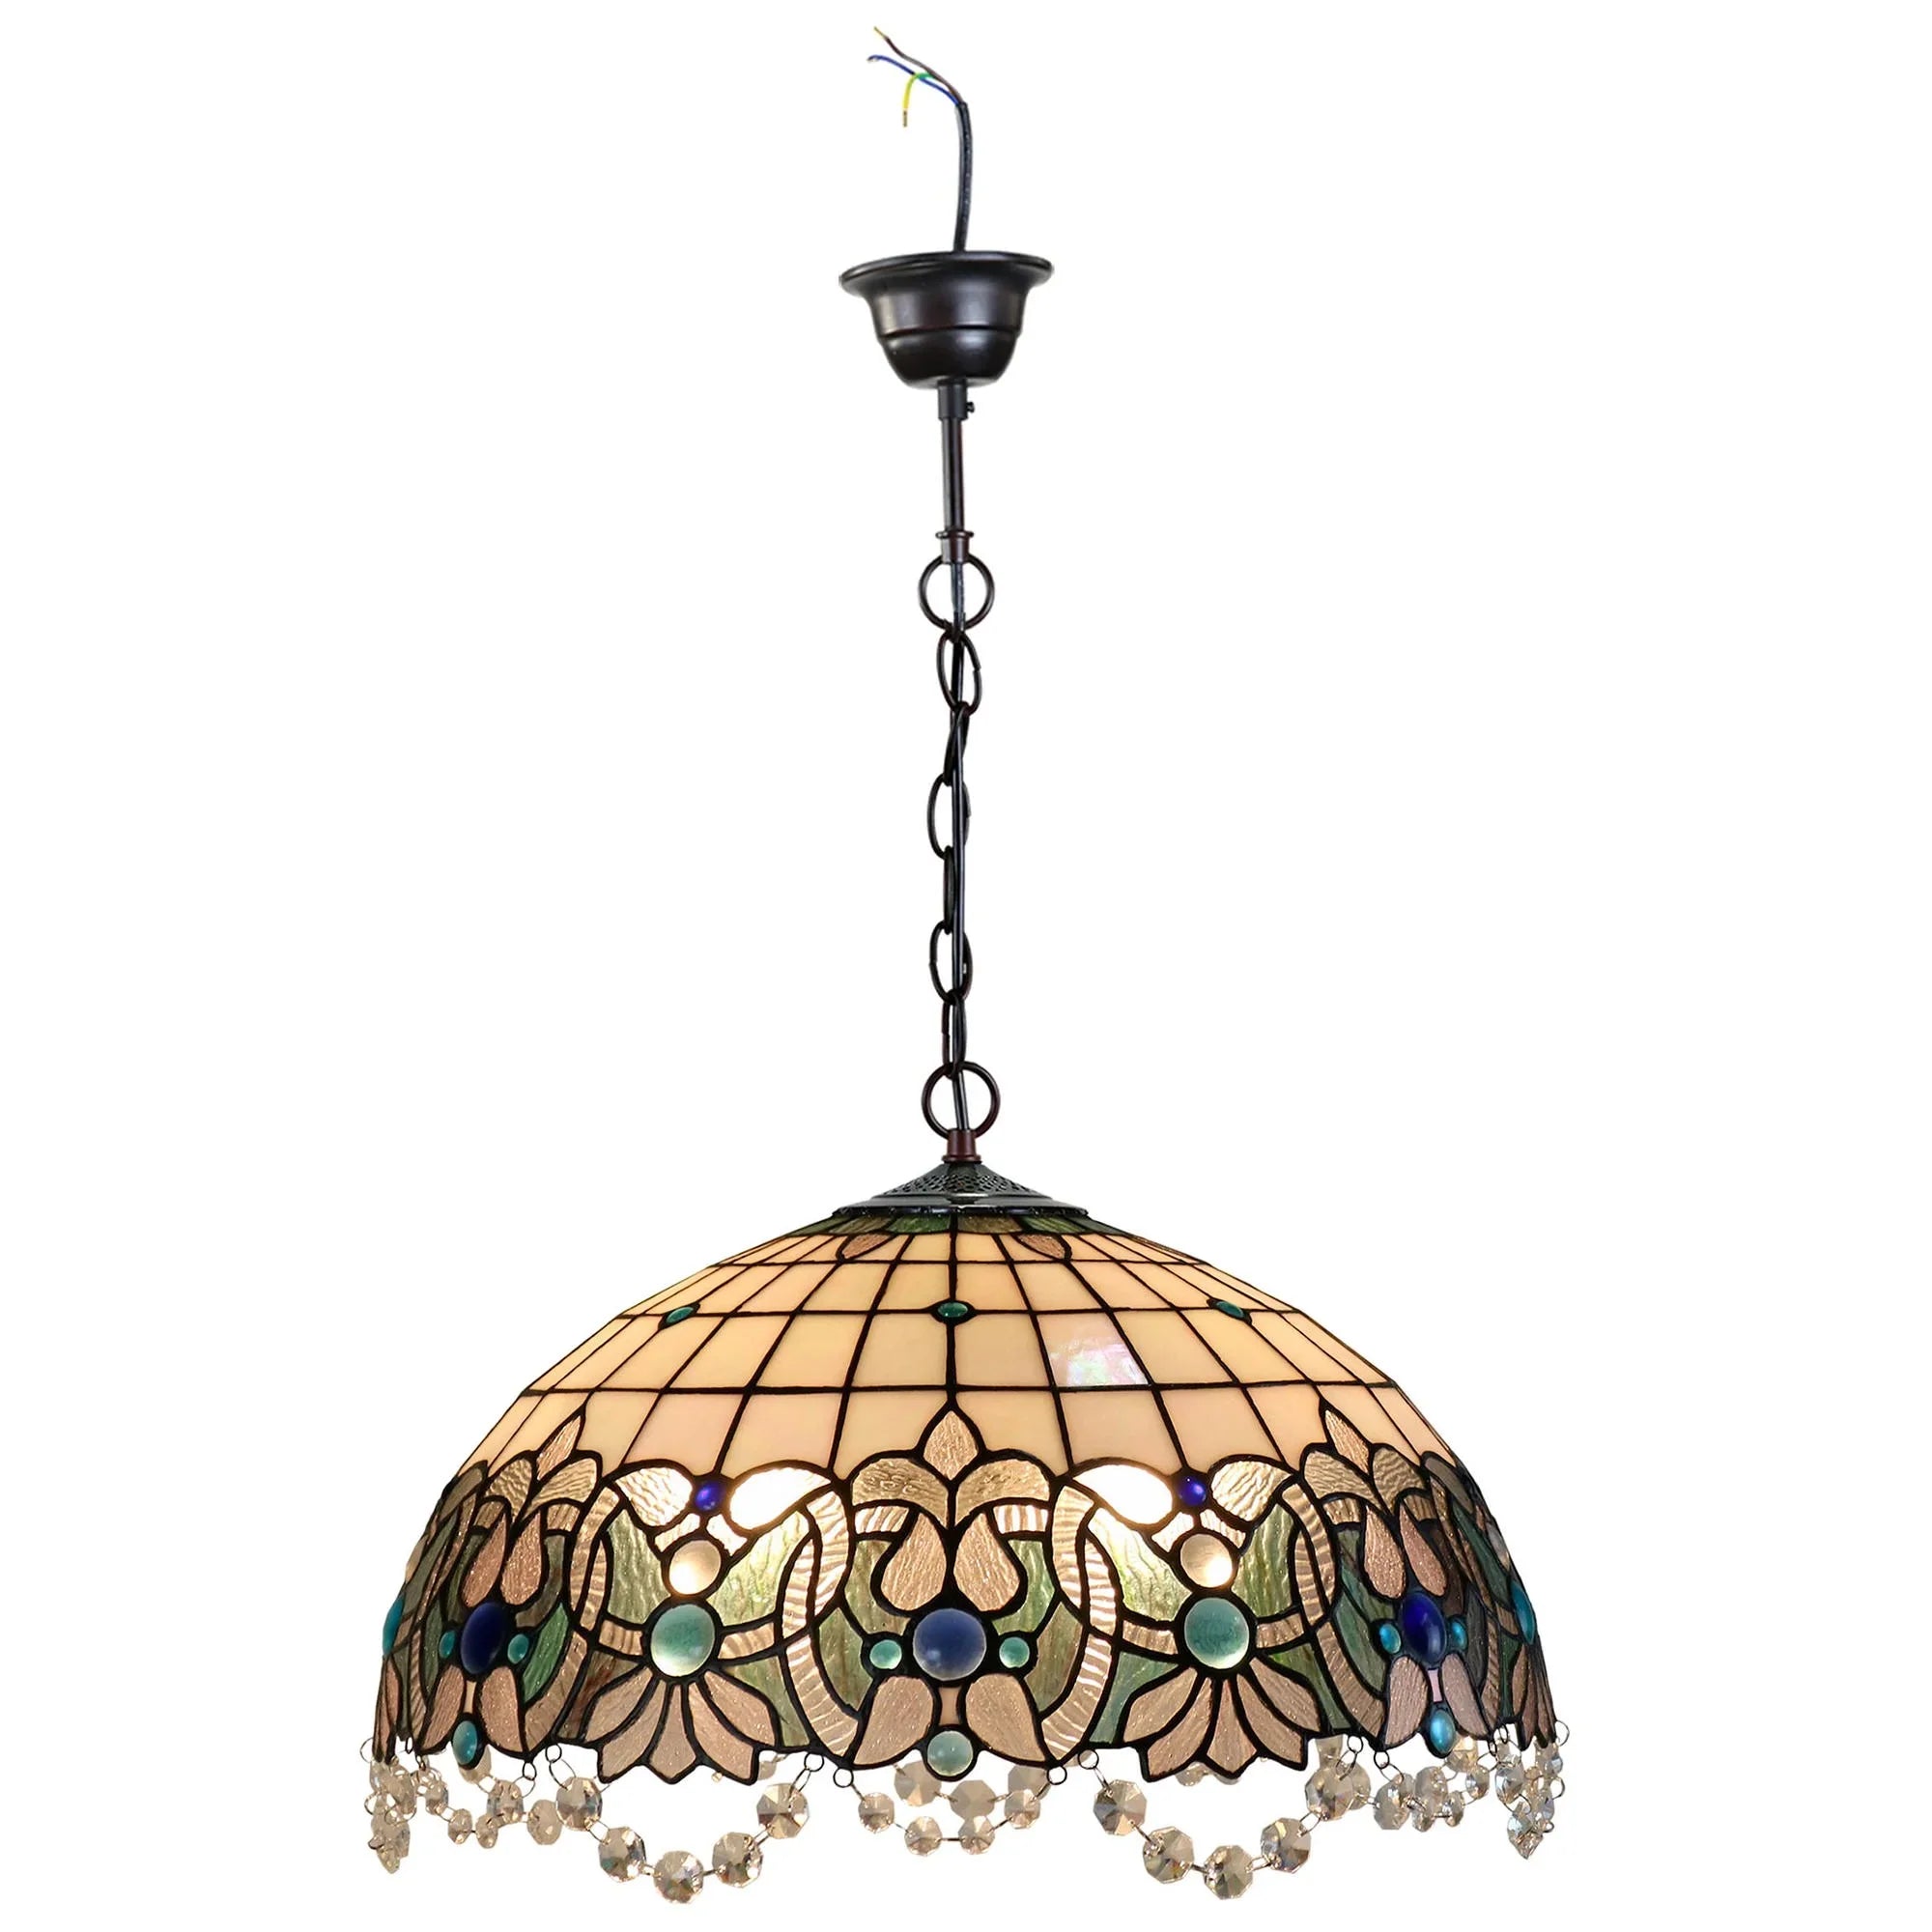 Shelby Tiffany Style Pendant Lamp - Teal & White - Notbrand